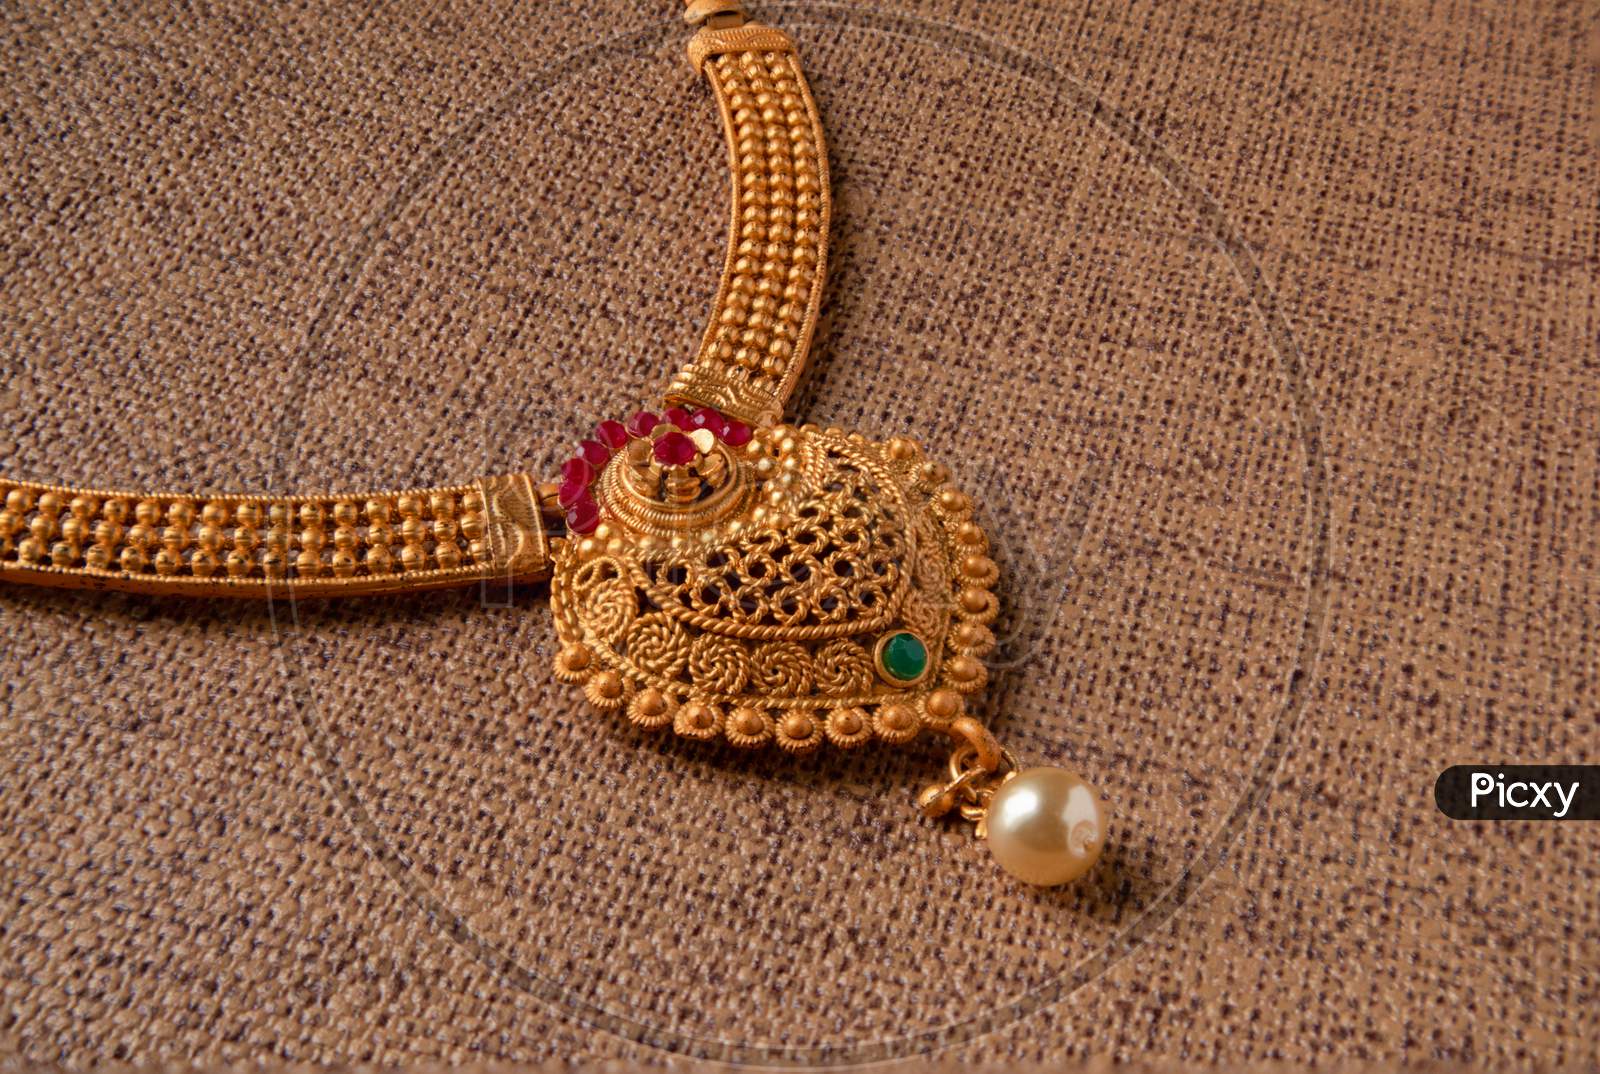 Indian Traditional Rolled Gold Or Gold Filled Necklace With Gemstones On Wooden Textured Background